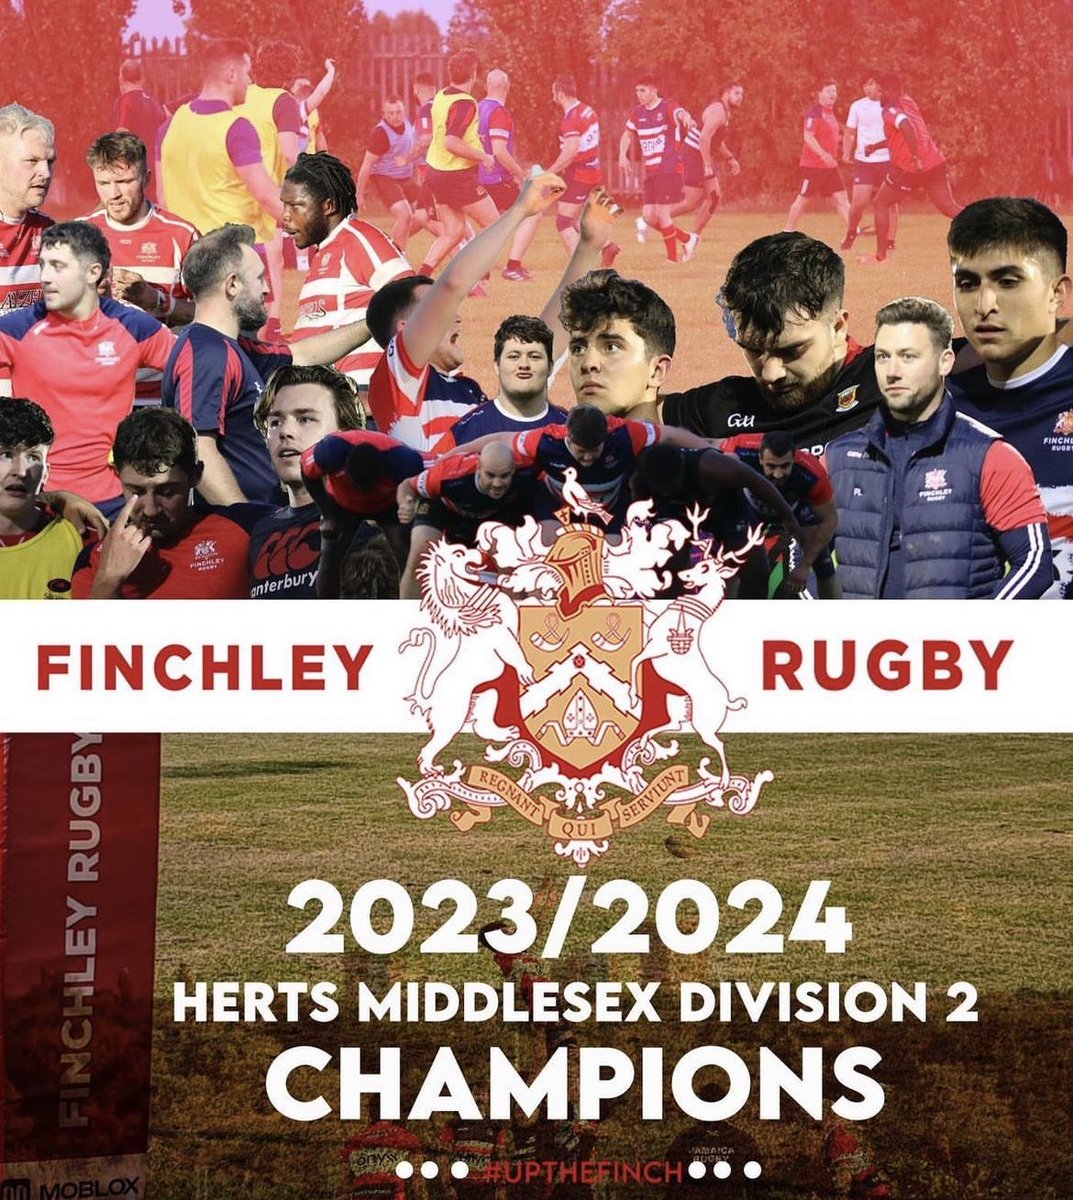 AXV Herts Middlesex Division 2 Champions #2023/24 #Champions #FinchleyRugby